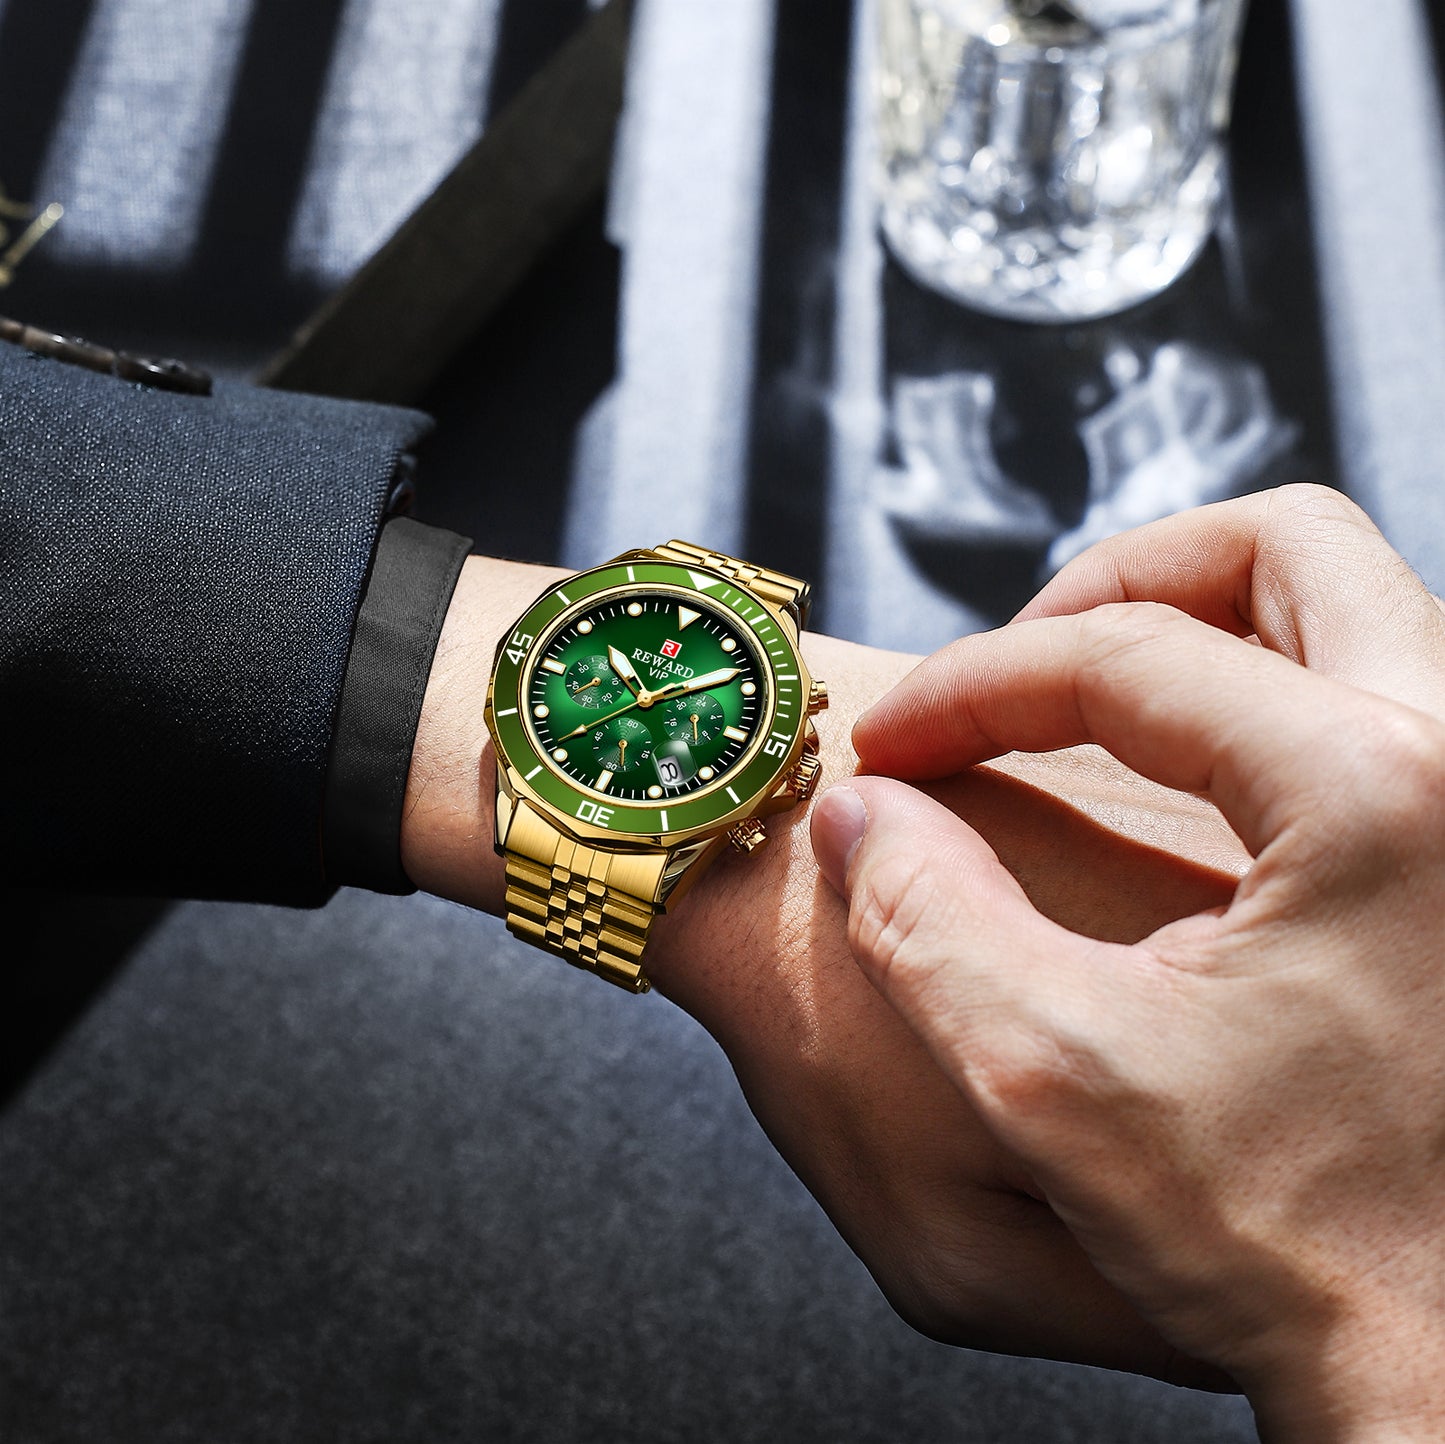 Marina Multifunction Watch Steel, Gold and Green colour